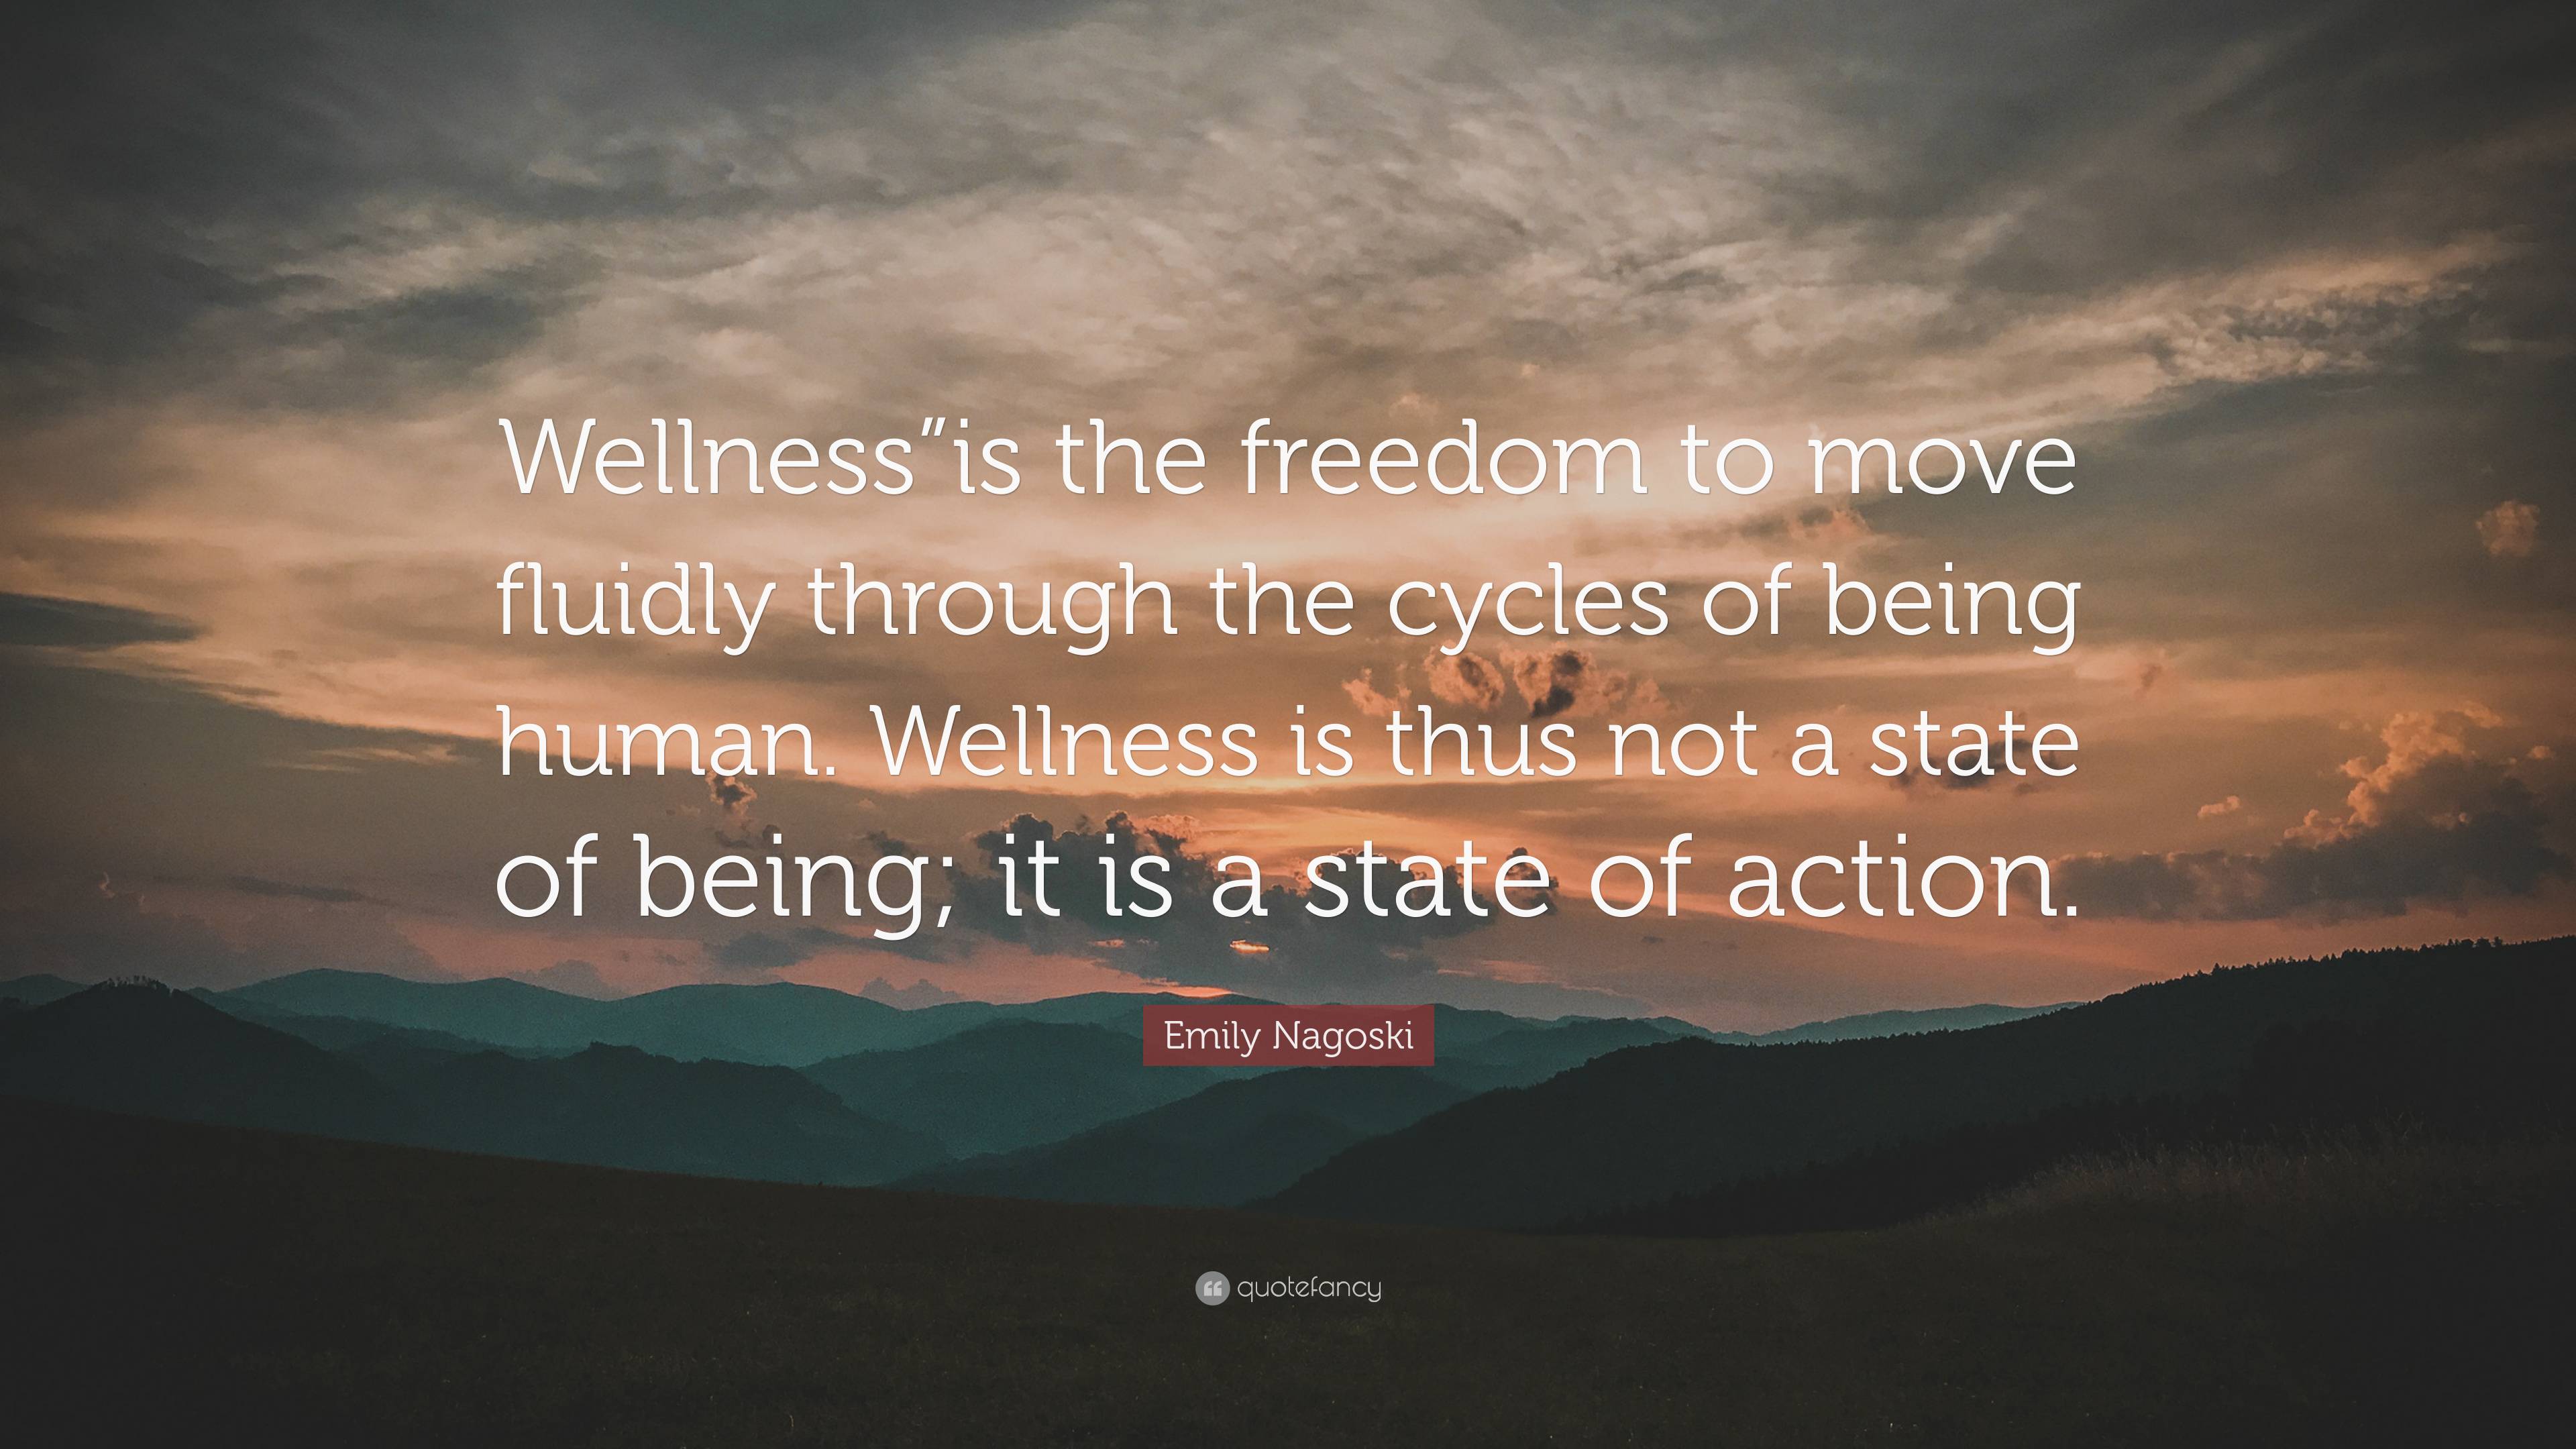 Emily Nagoski Quote: “Wellness”is the freedom to move fluidly through the  cycles of being human. Wellness is thus not a state of being; it is ”